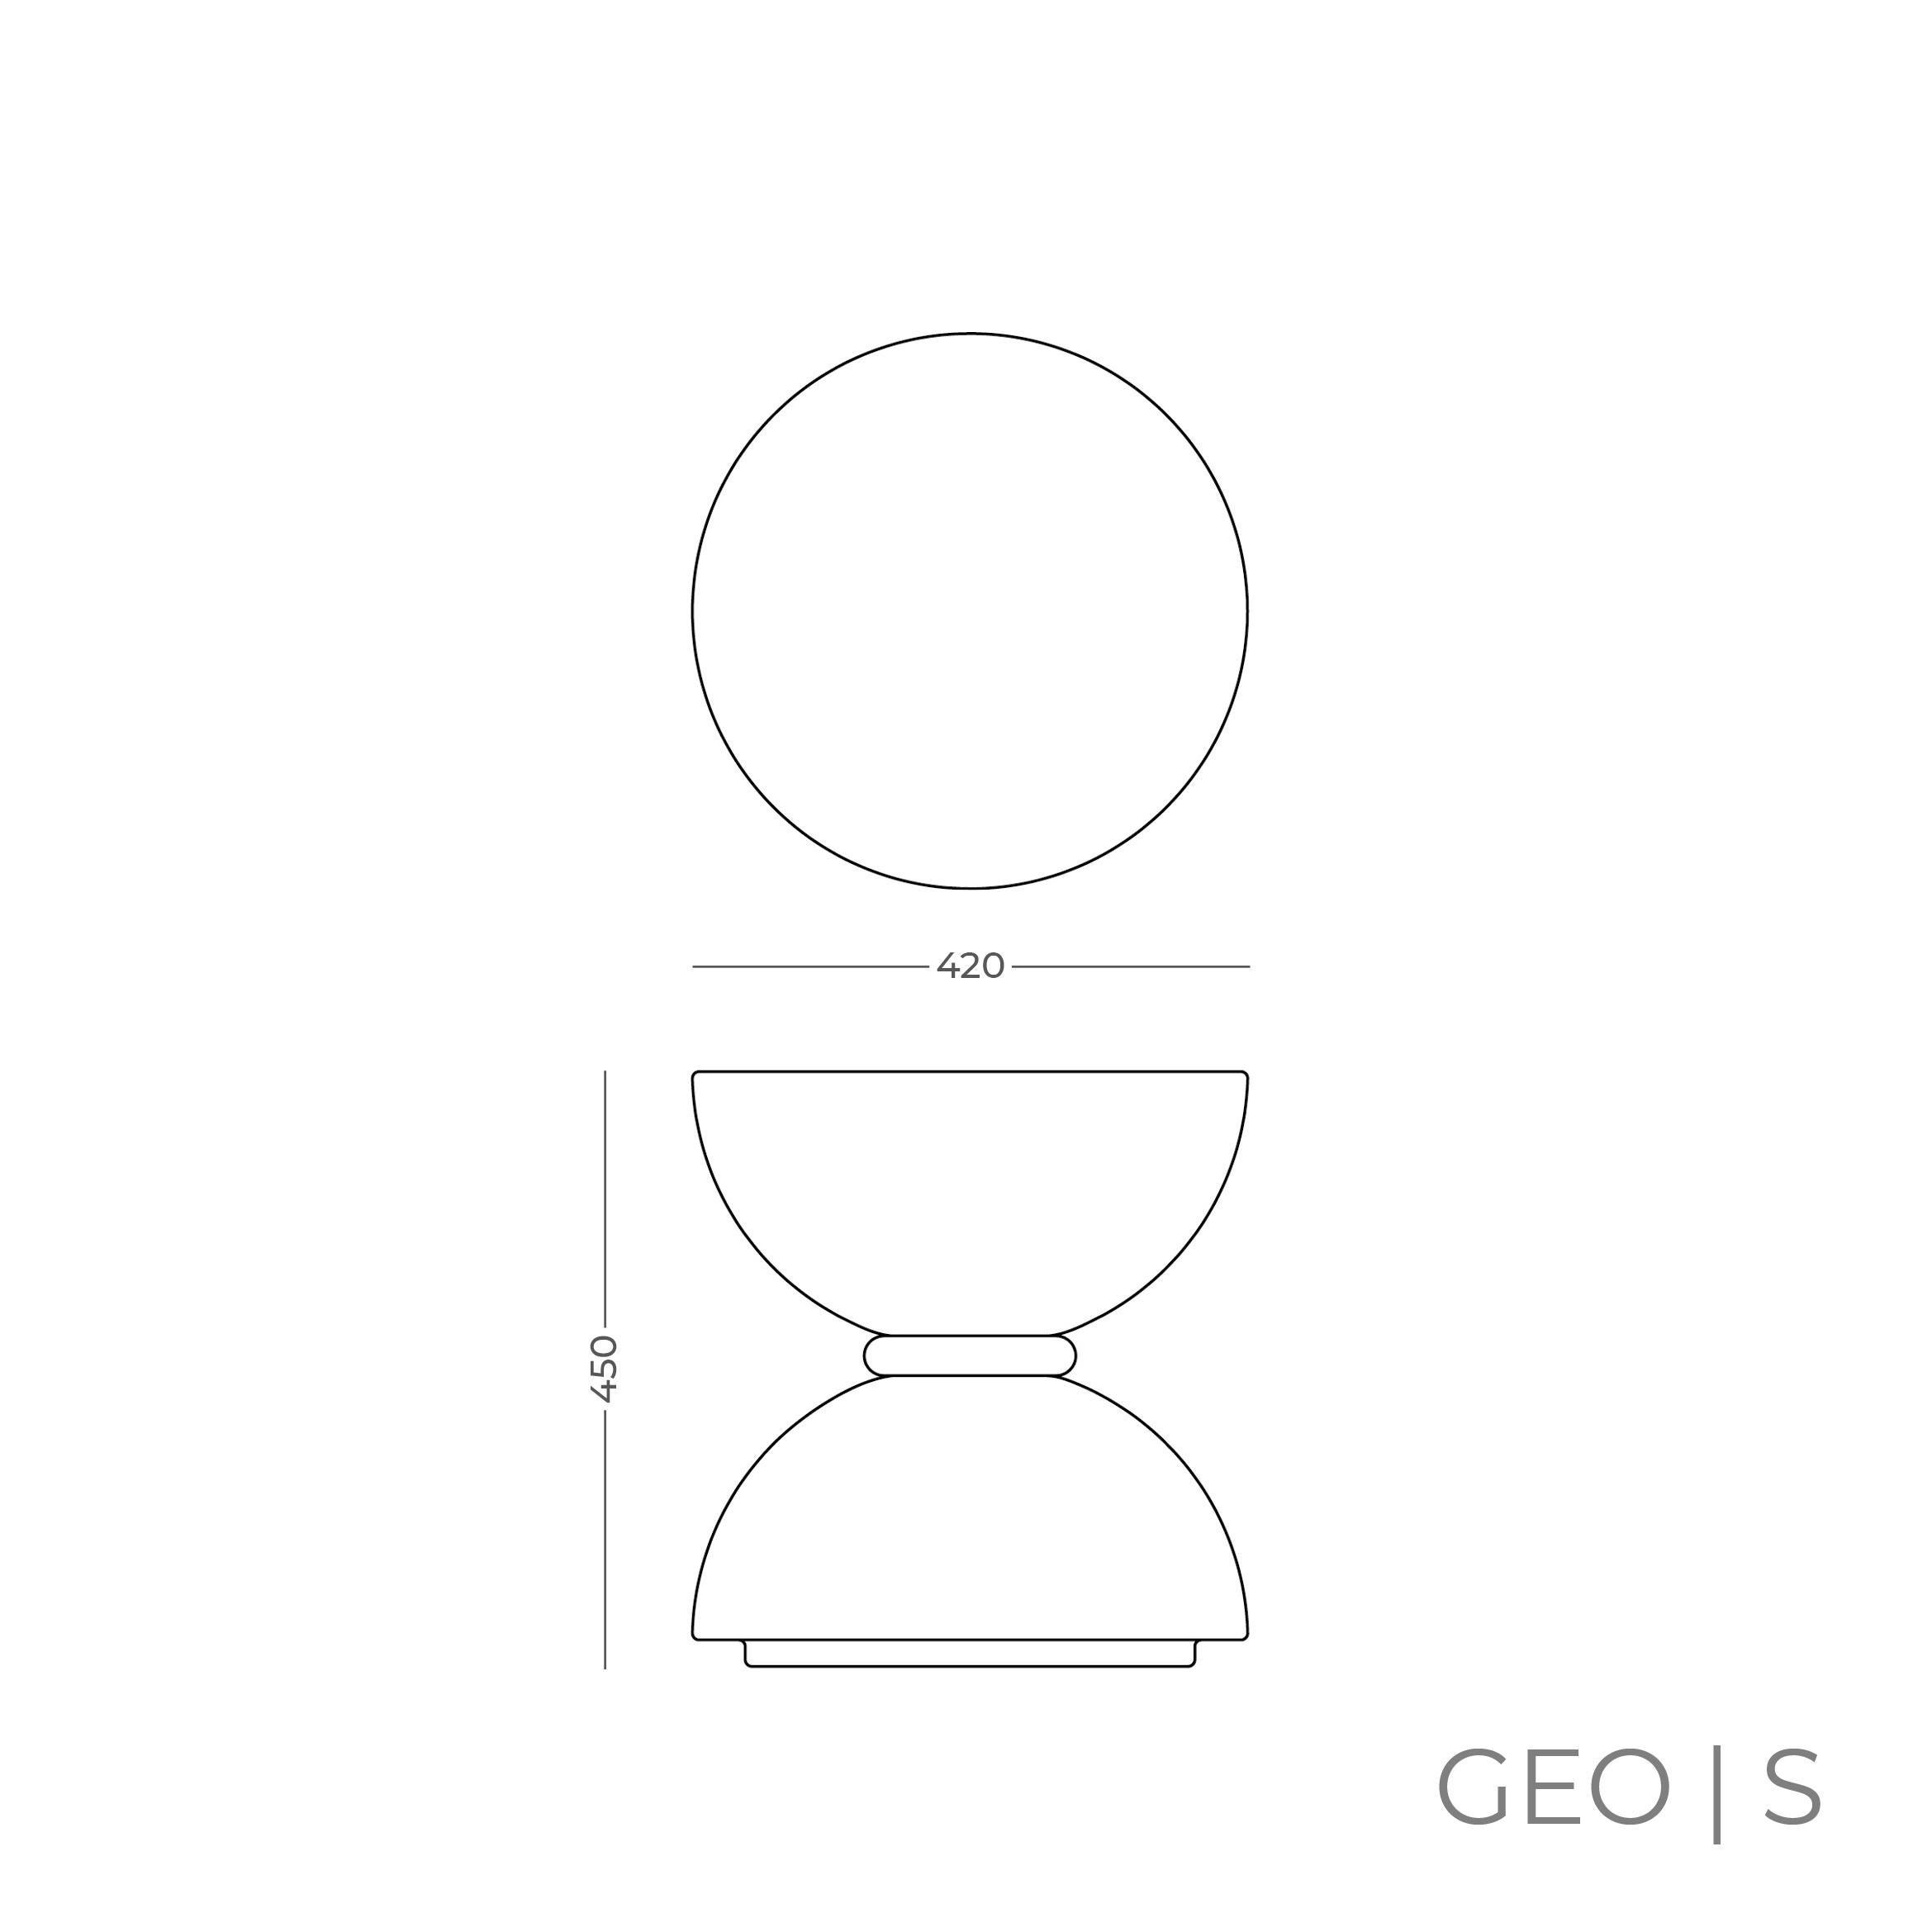 Minimalist Limestone Coffee Tables Geo S Collection by Pimar Italy For Sale